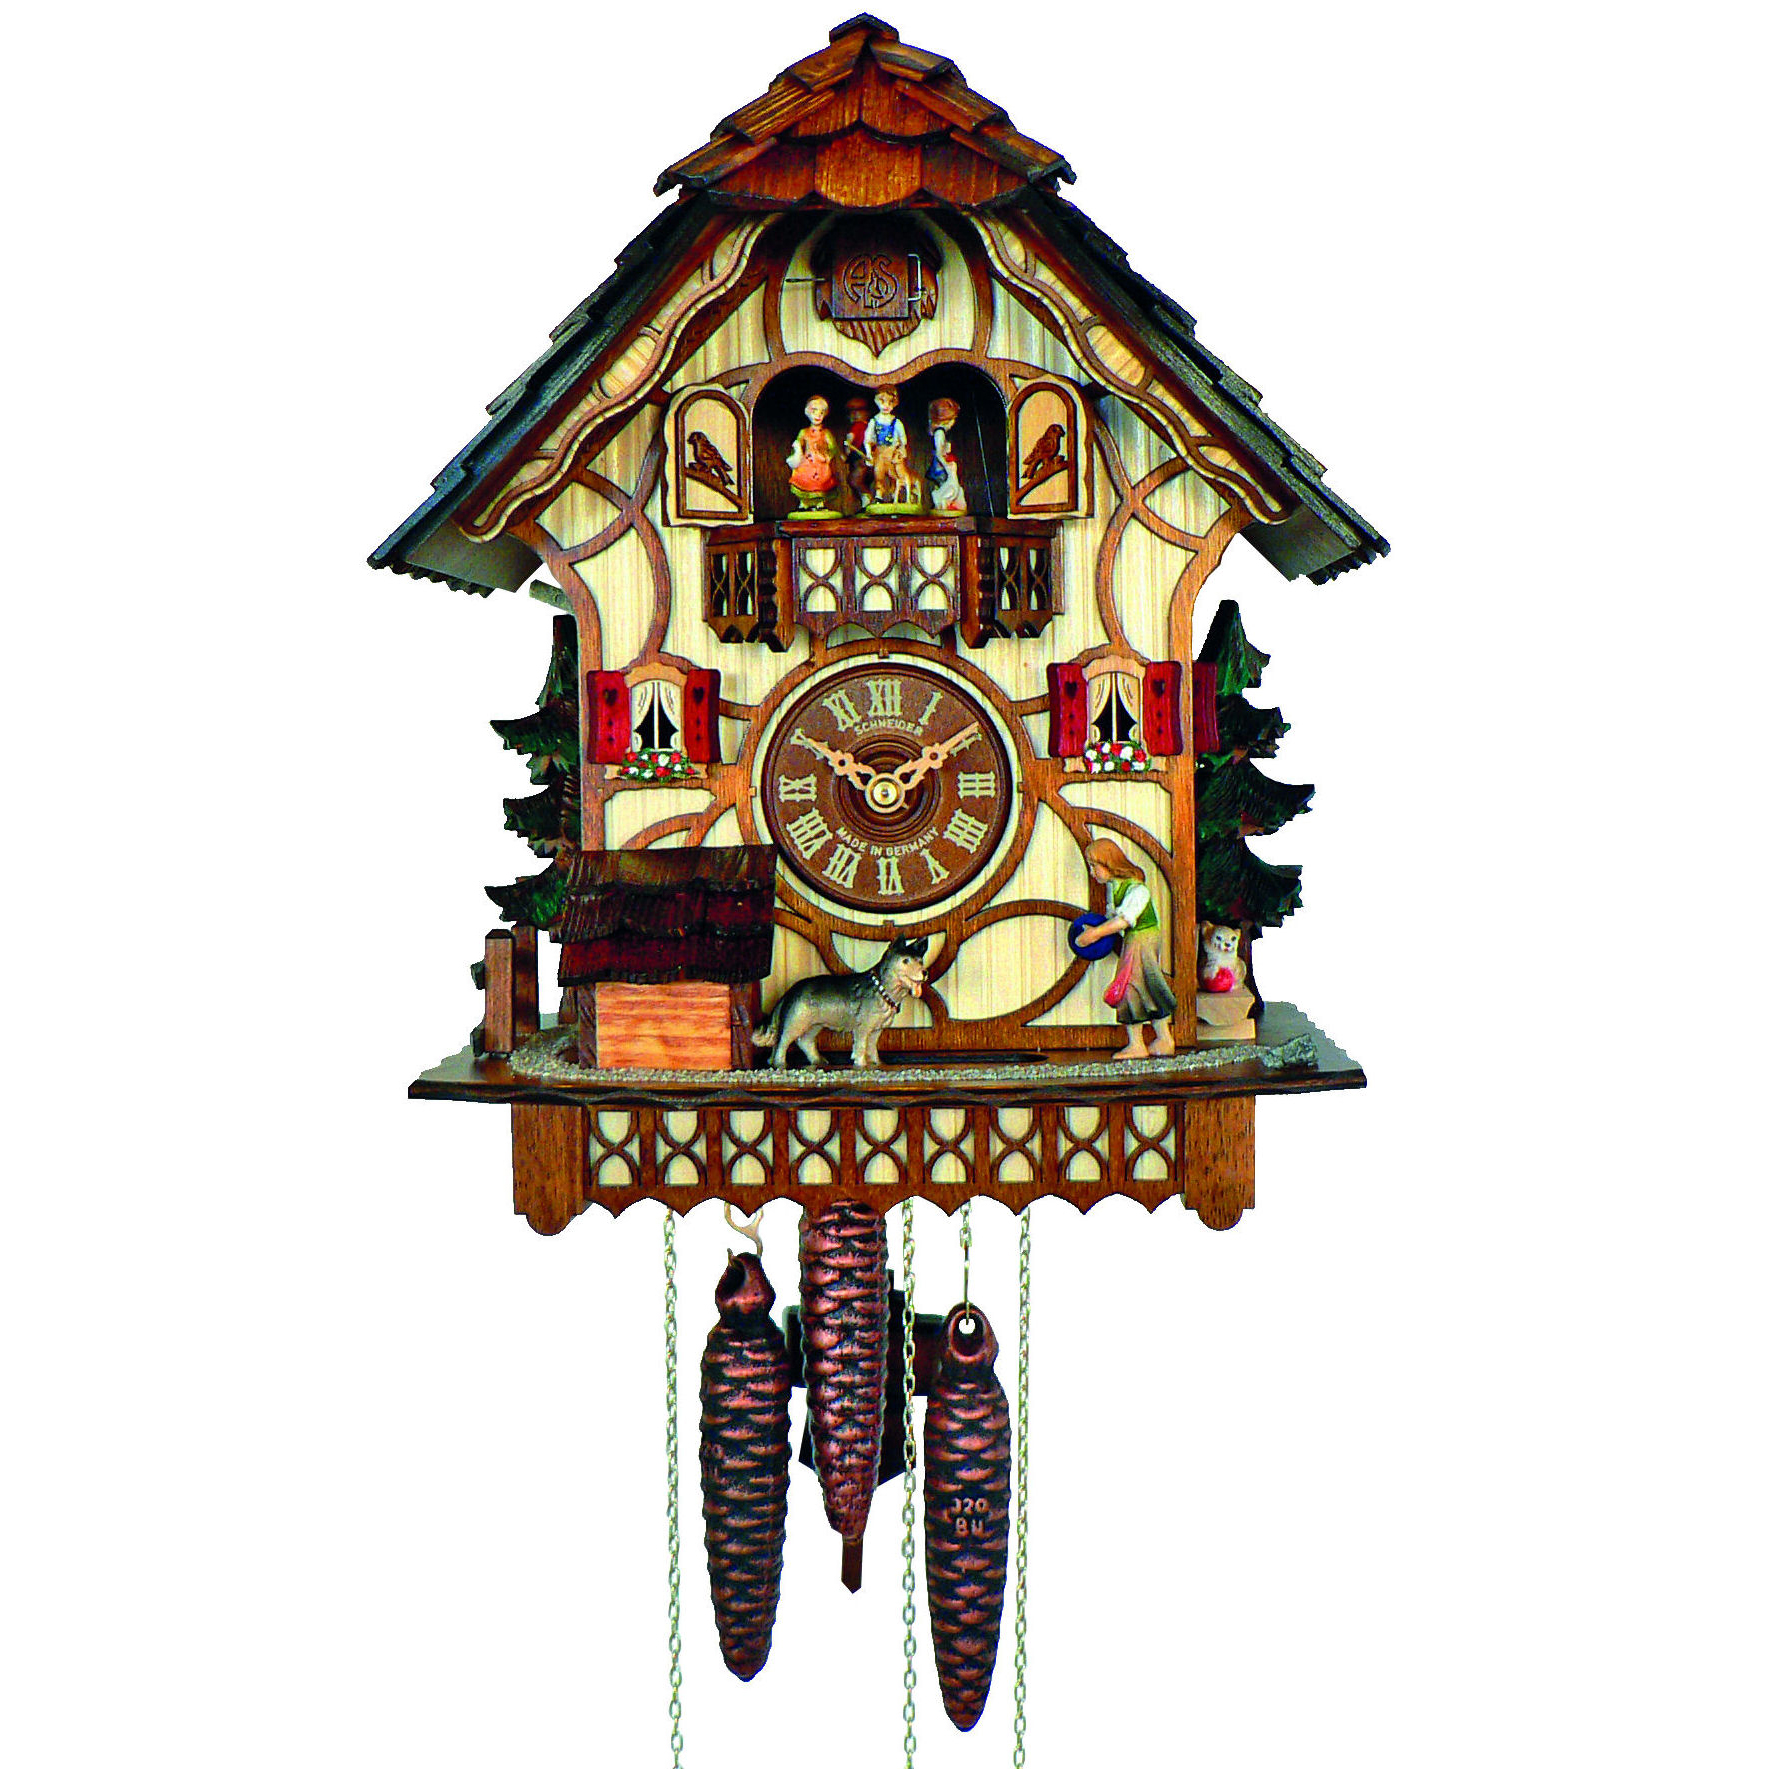 Chalet Style Cuckoo Clock with Little Girl and Dog - CuckooClocks.co.uk.